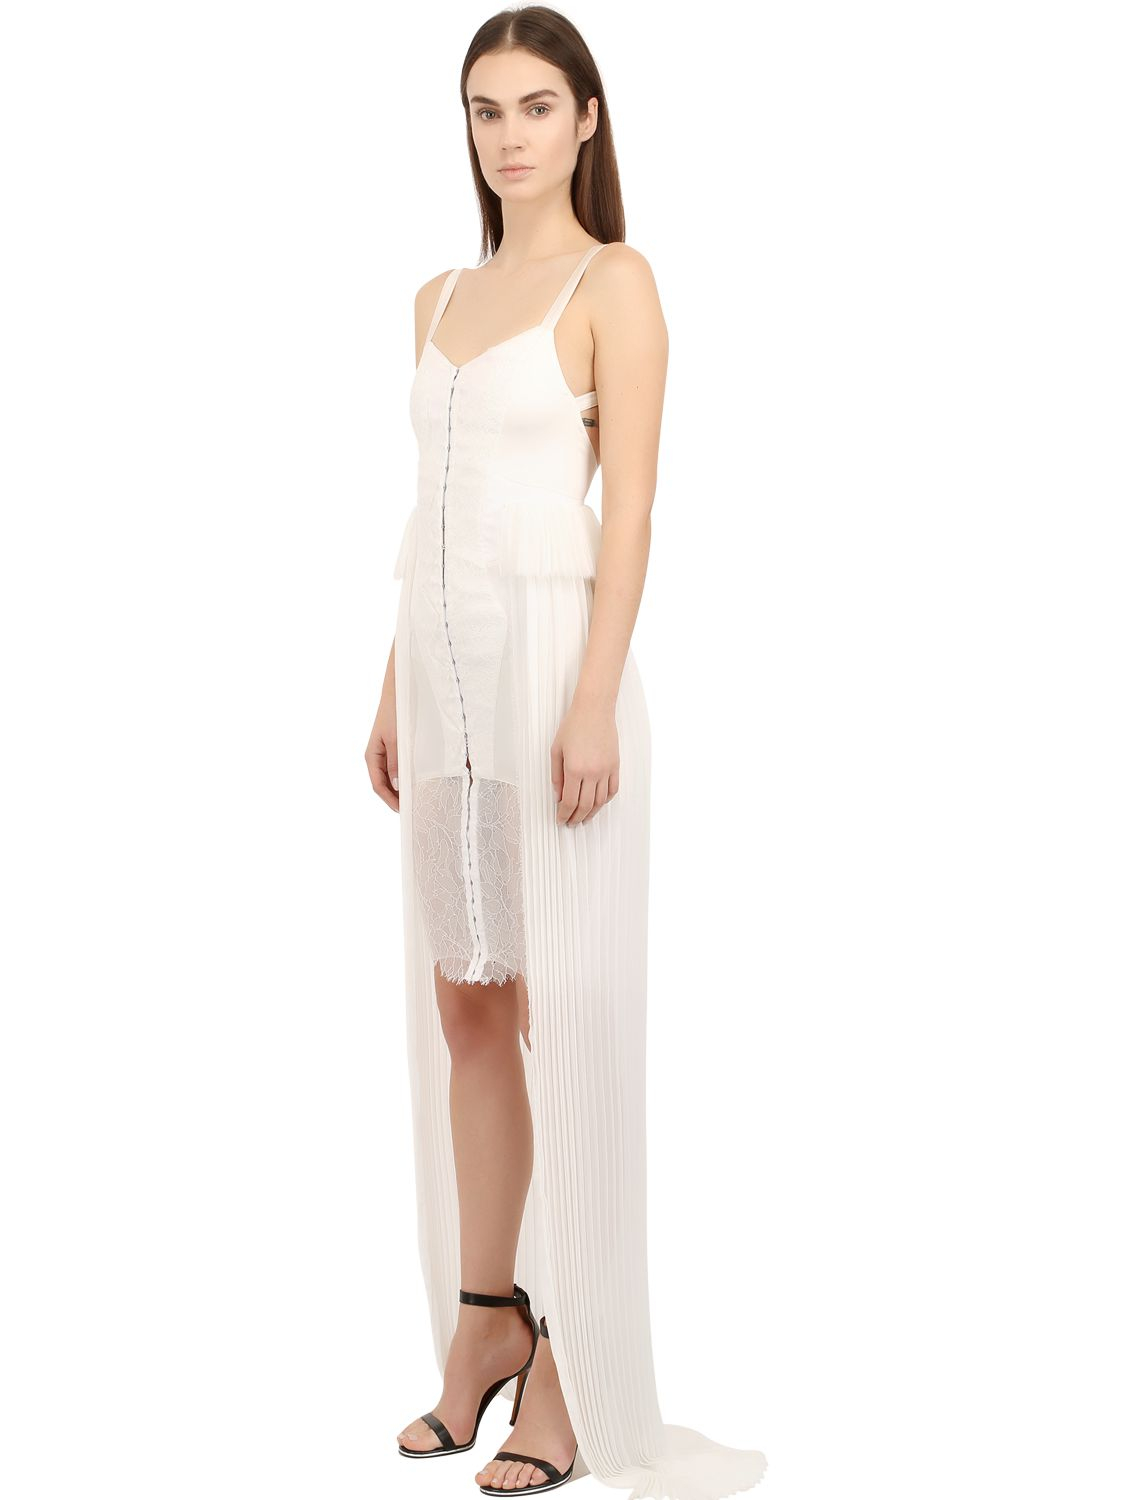 Lyst - Murmur Stretch Satin & Chantilly Lace Dress in White